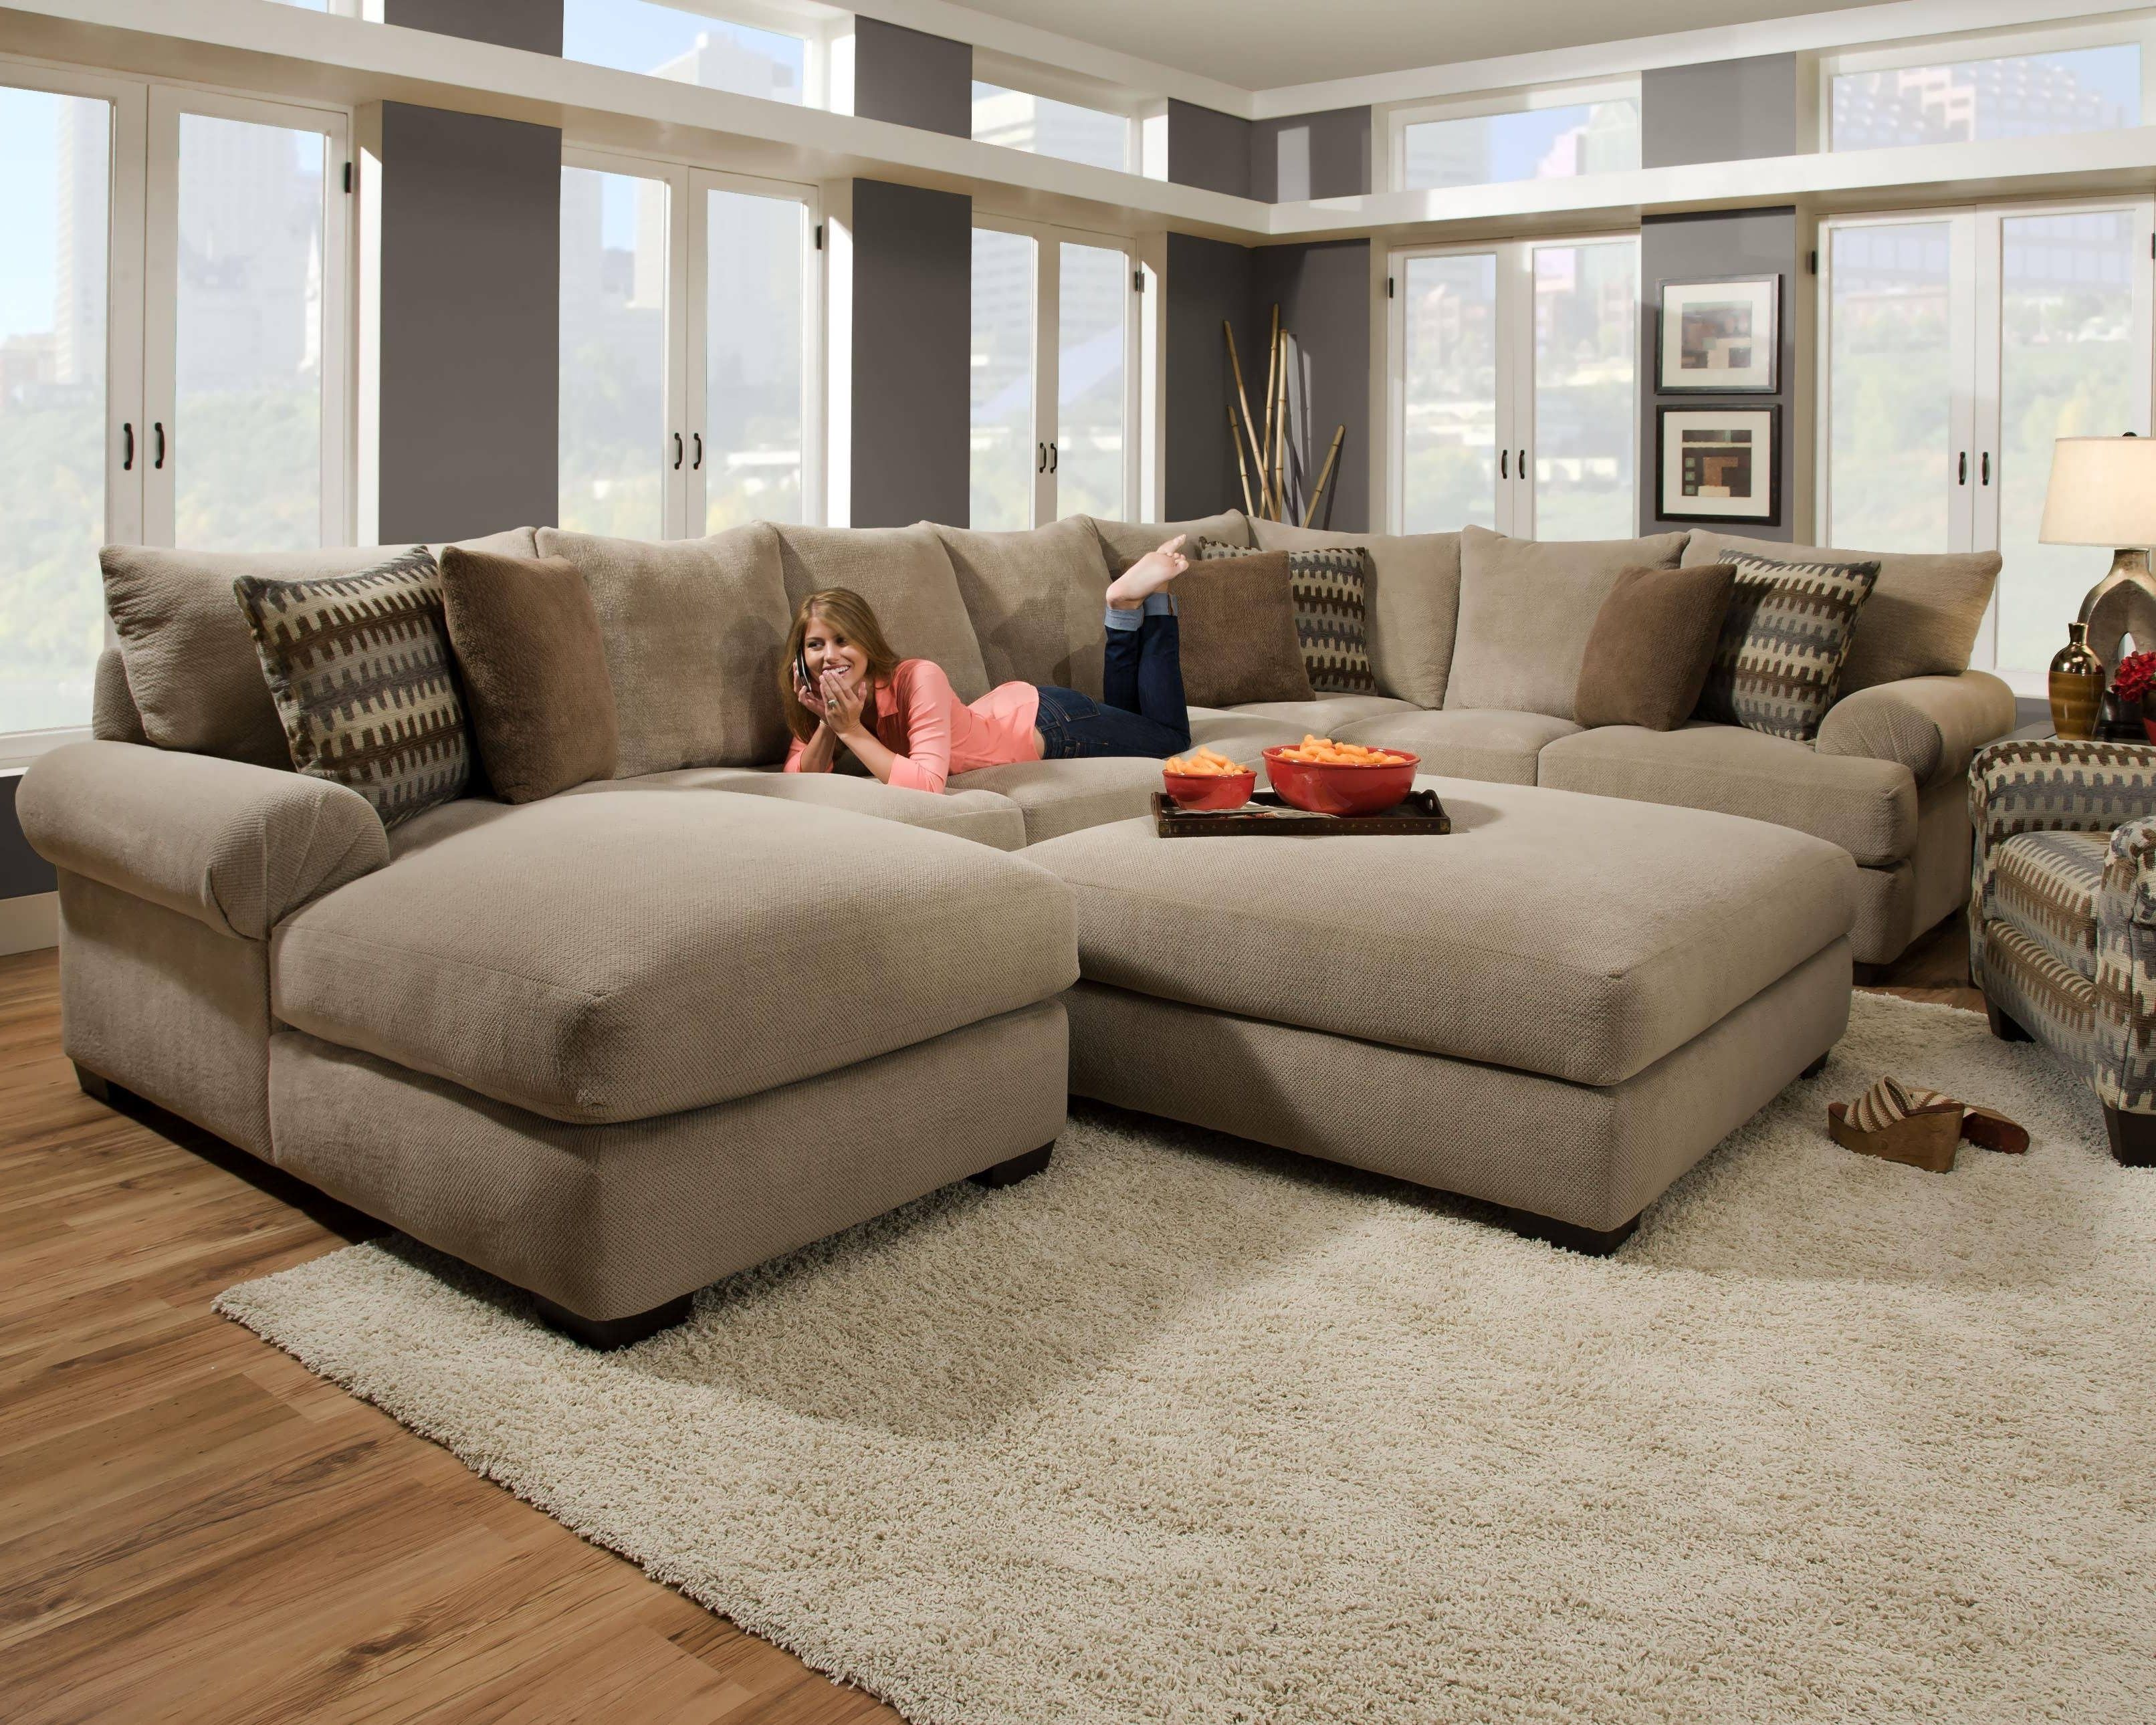 Sofa : Living Room Sectionals Sectional With Chaise Red Sectional In Fashionable Tan Sectionals With Chaise (View 2 of 15)